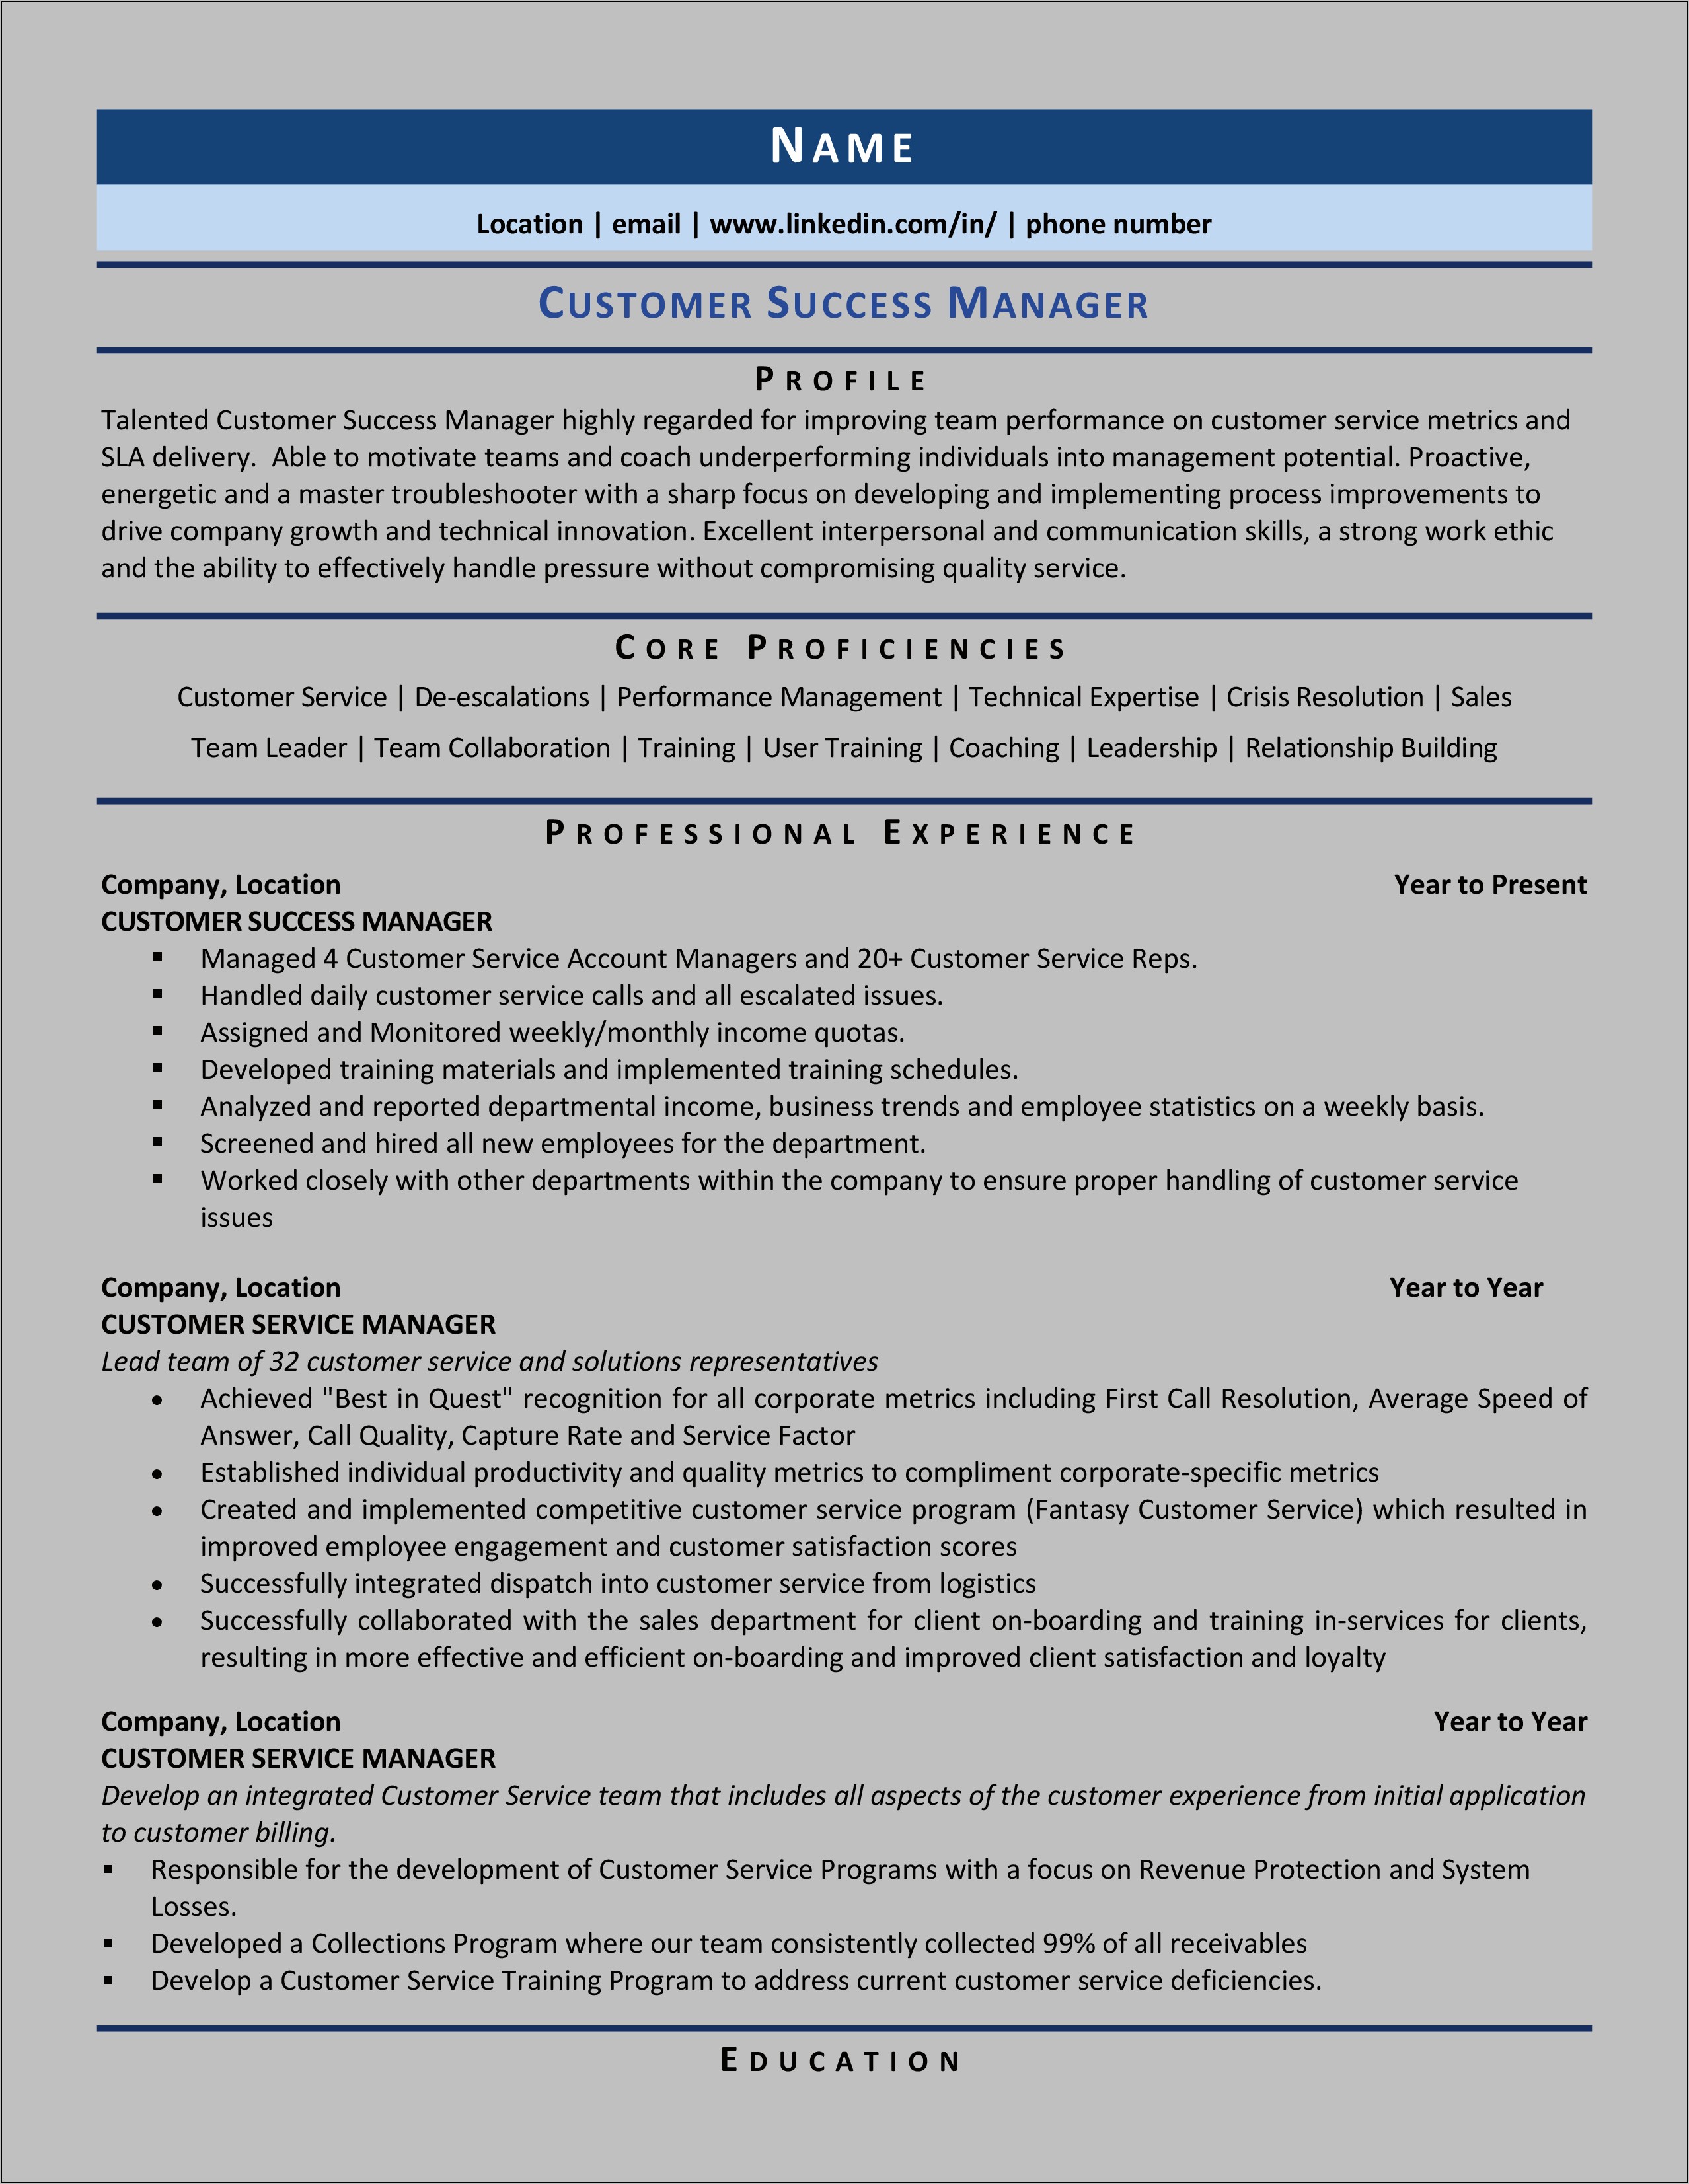 Resume Technical Skills And Achieveemnts